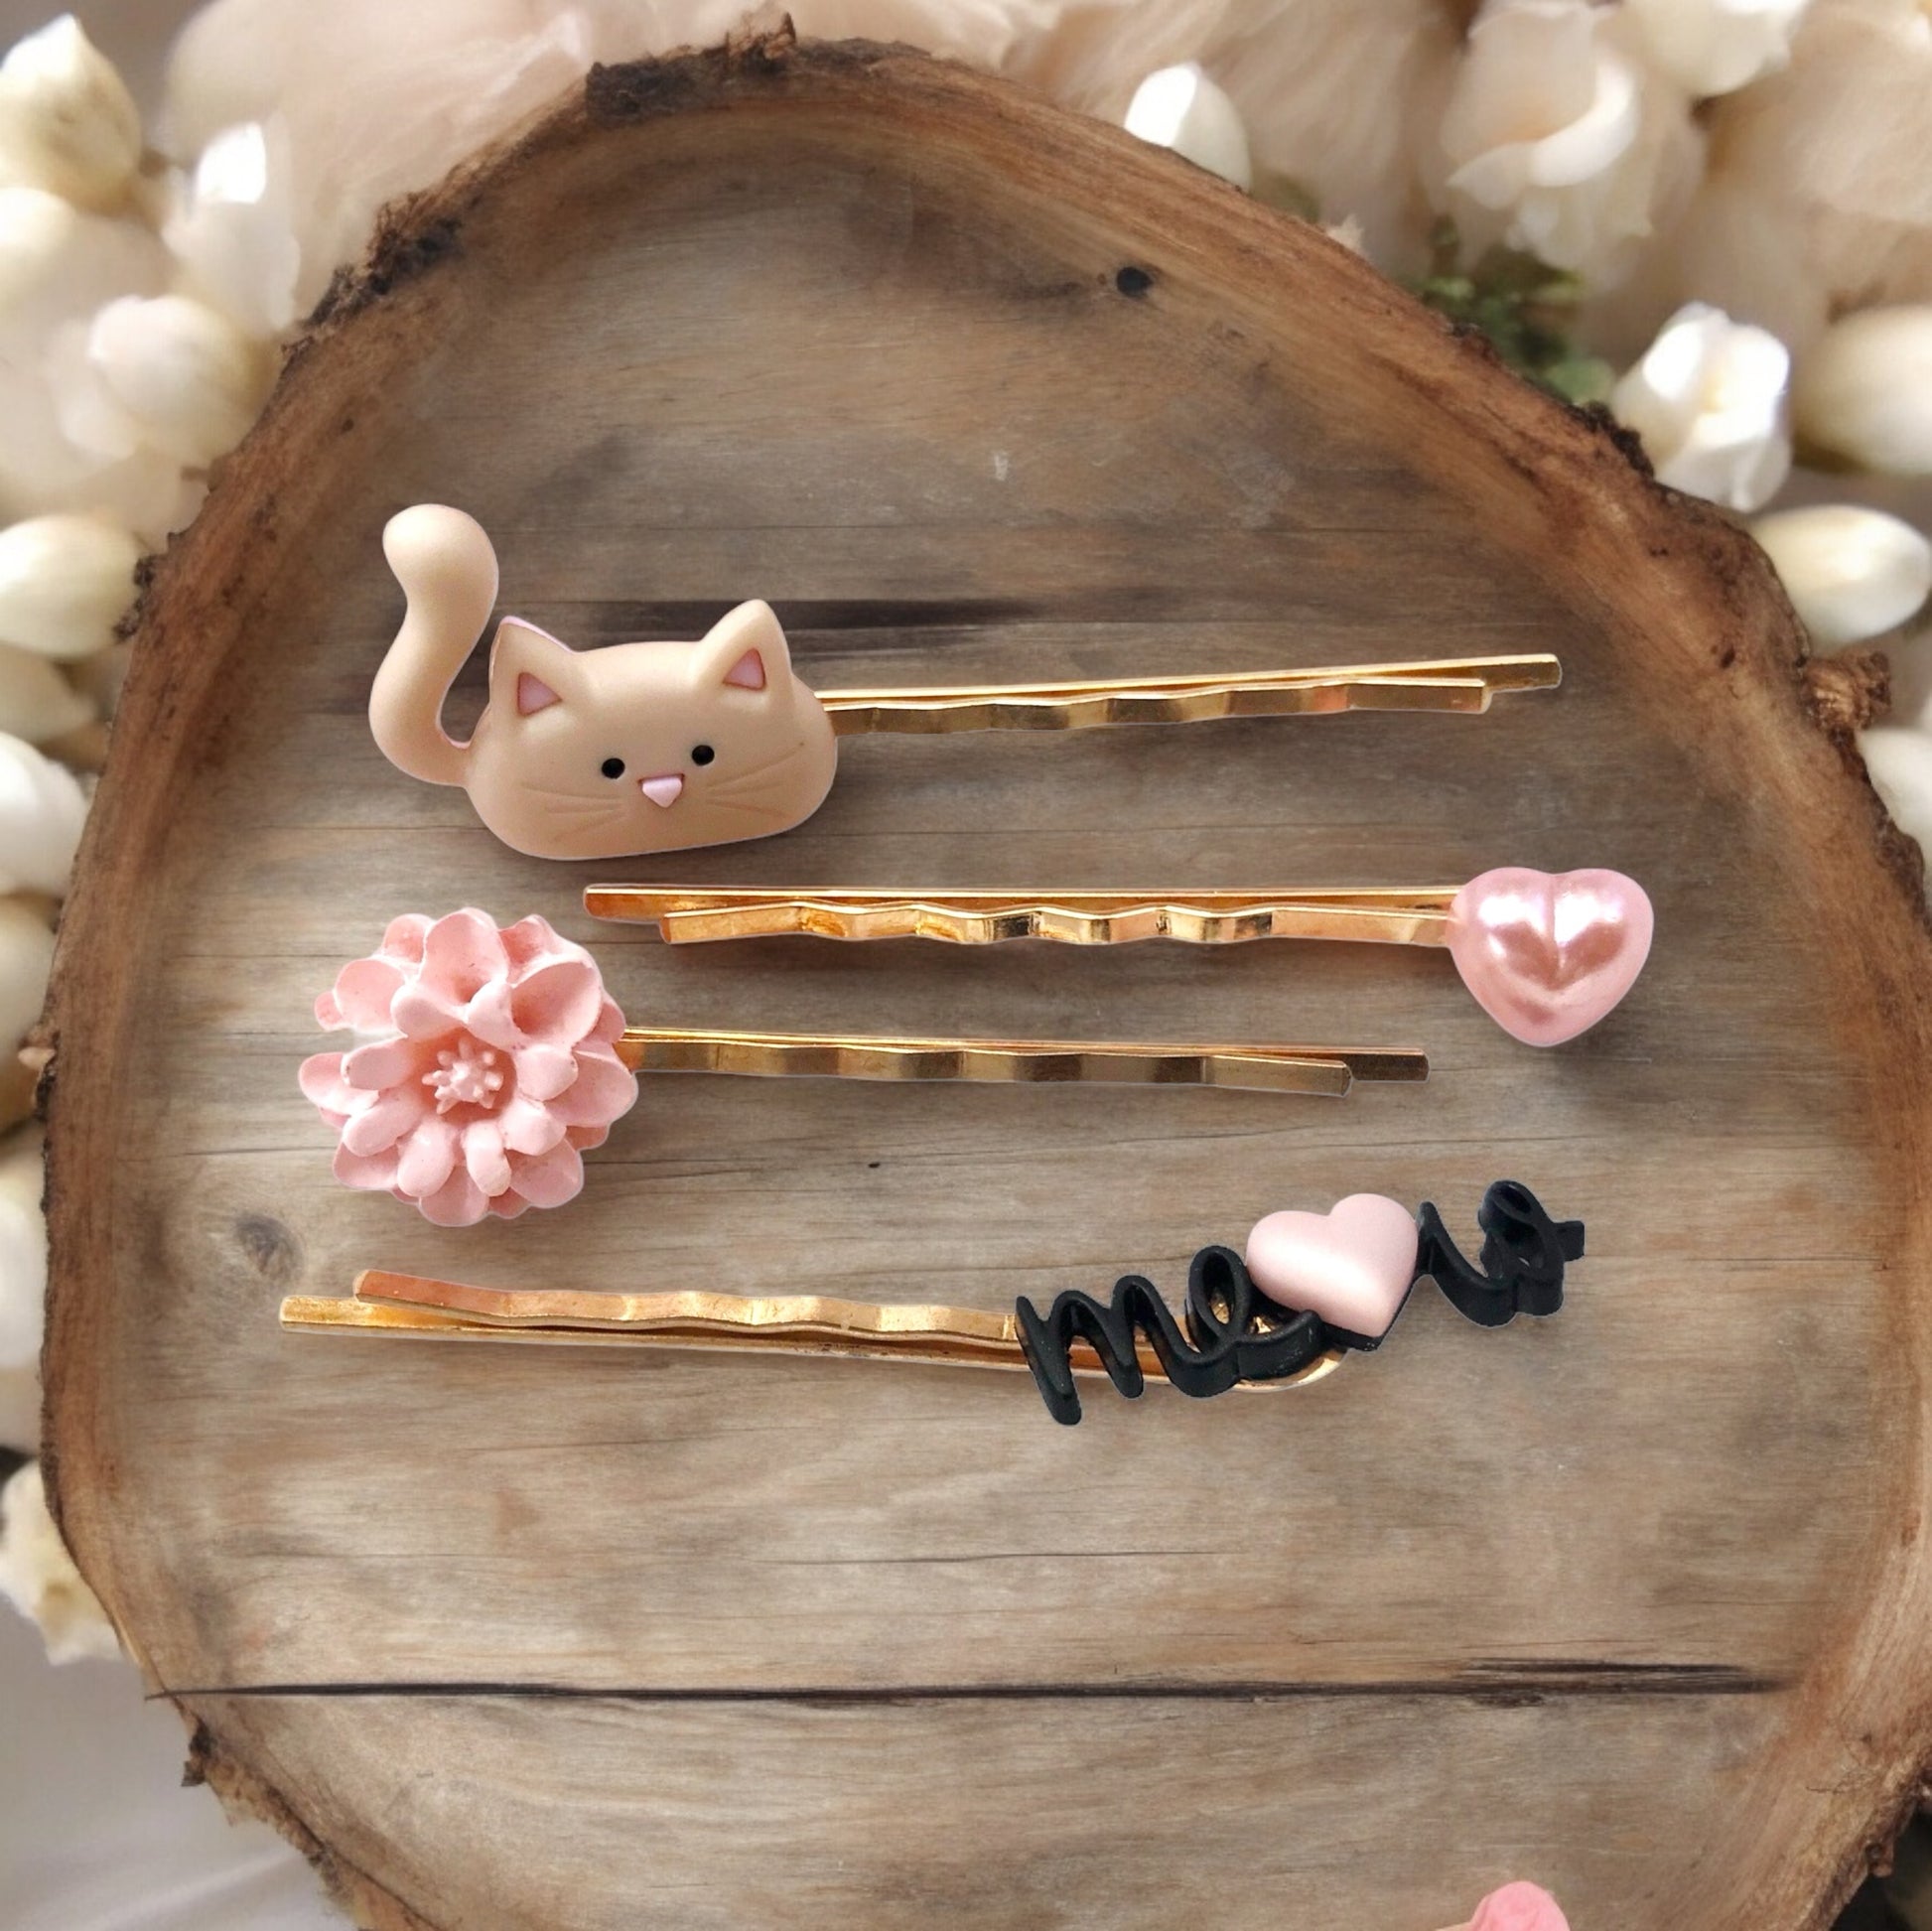 Set of Tan Cat, Pink Heart, Pink Flower, & Meow Hair Pins: Adorable Accessories for Cute Hairstyles"